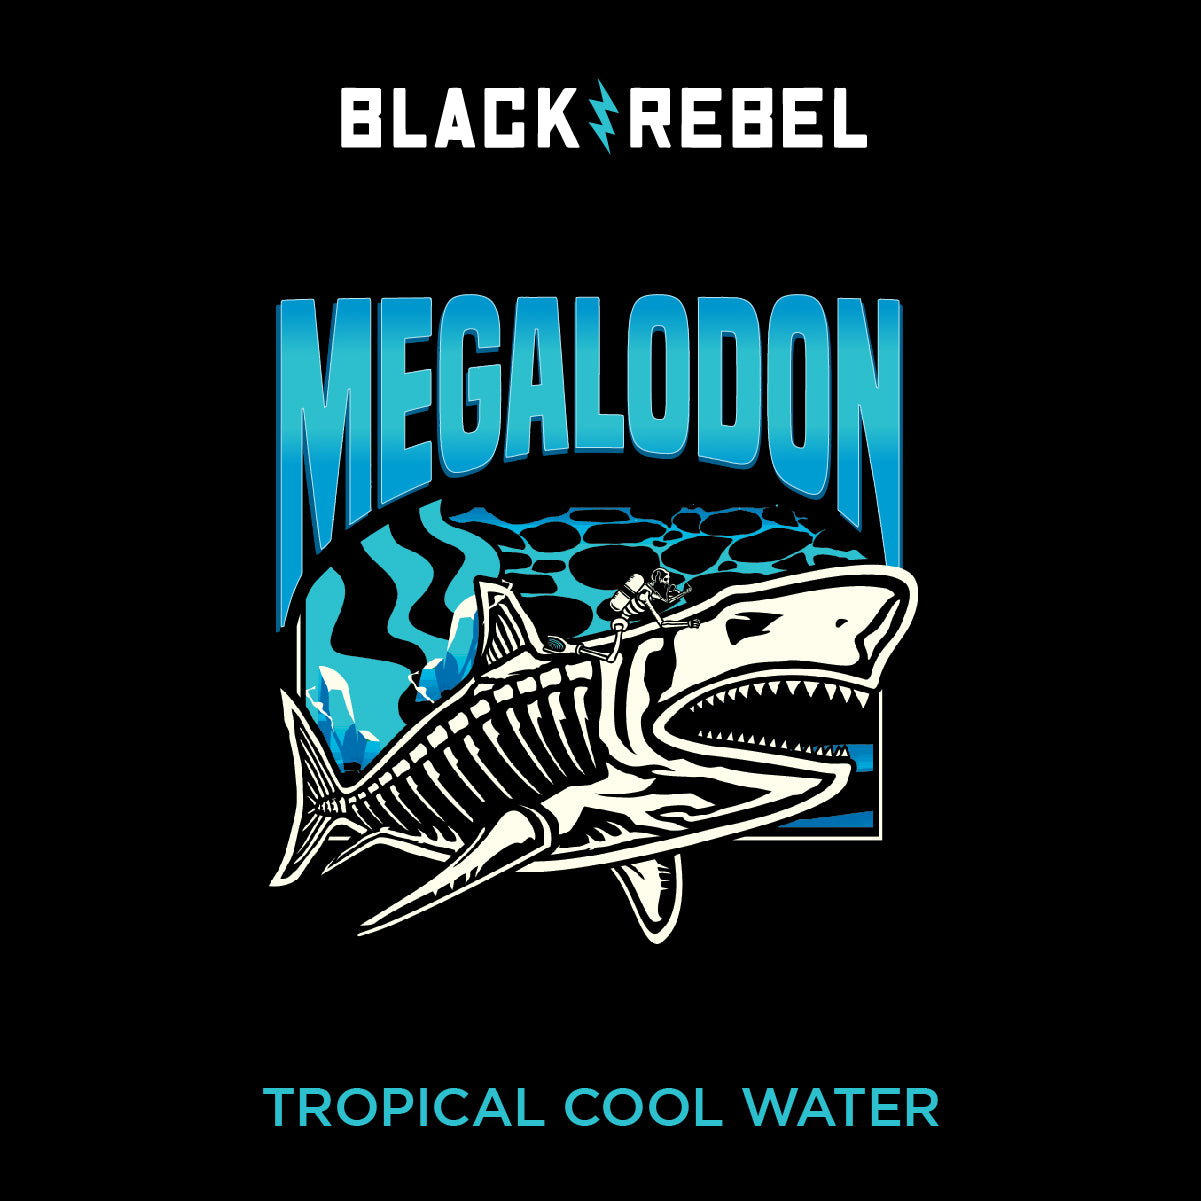 THE MEGALODON (tropical cool water)